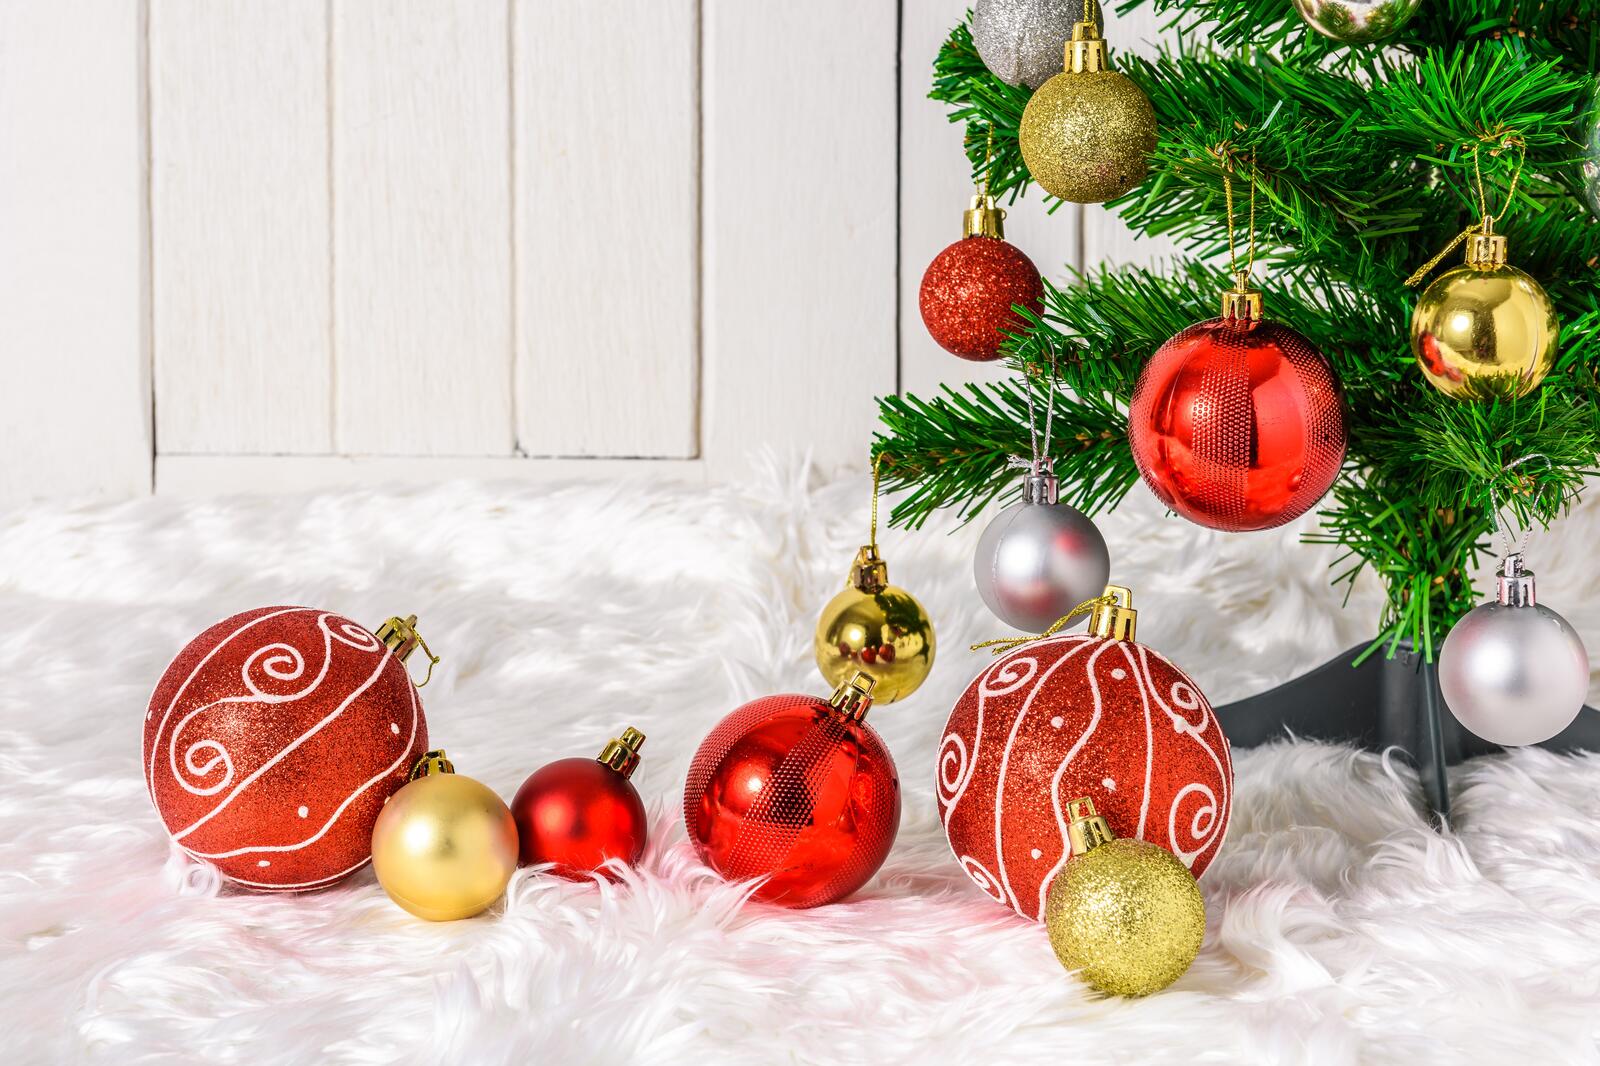 Free photo New Year`s tree with Christmas decorations